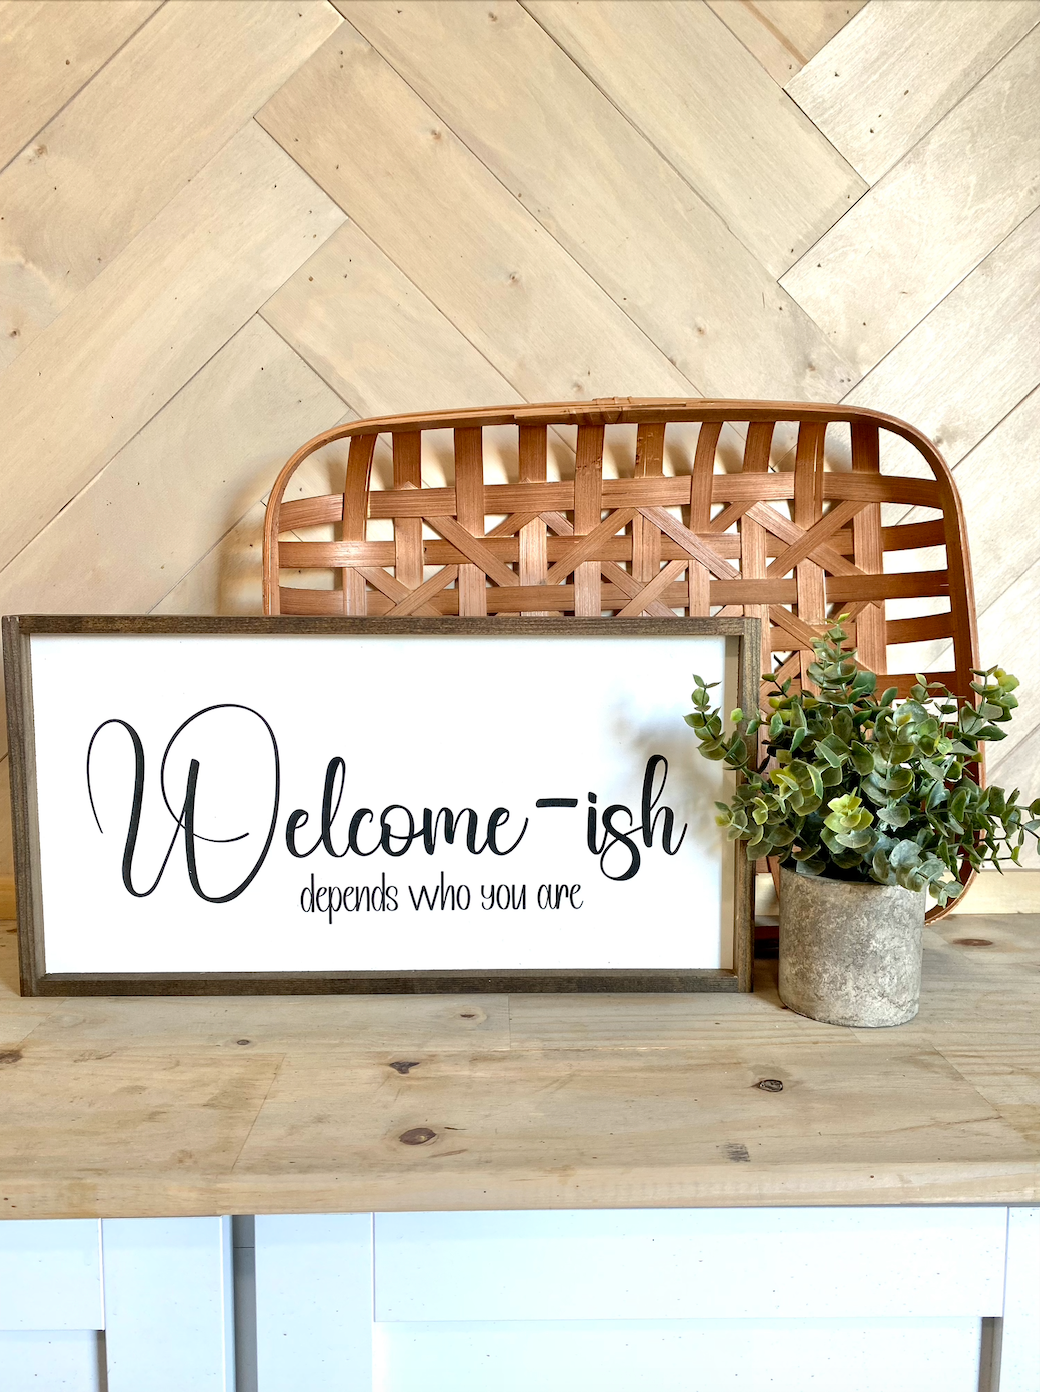 welcome-ish depends who you are family wood sign farmhouse humor sign funny livingroom sign